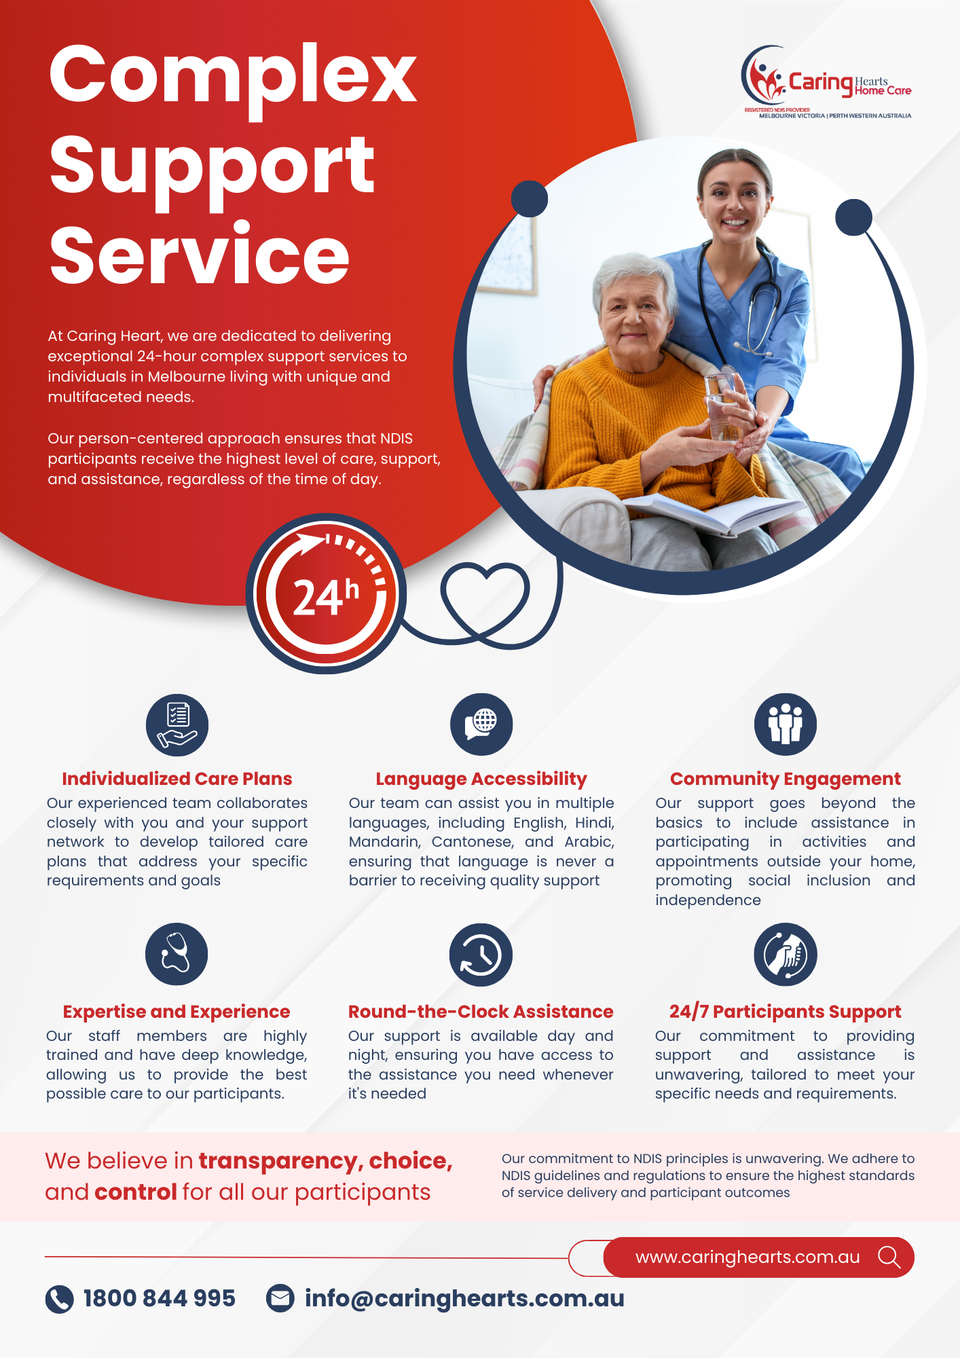 Caring Hearts NDIS Complex Support Service Melbourne Flyer